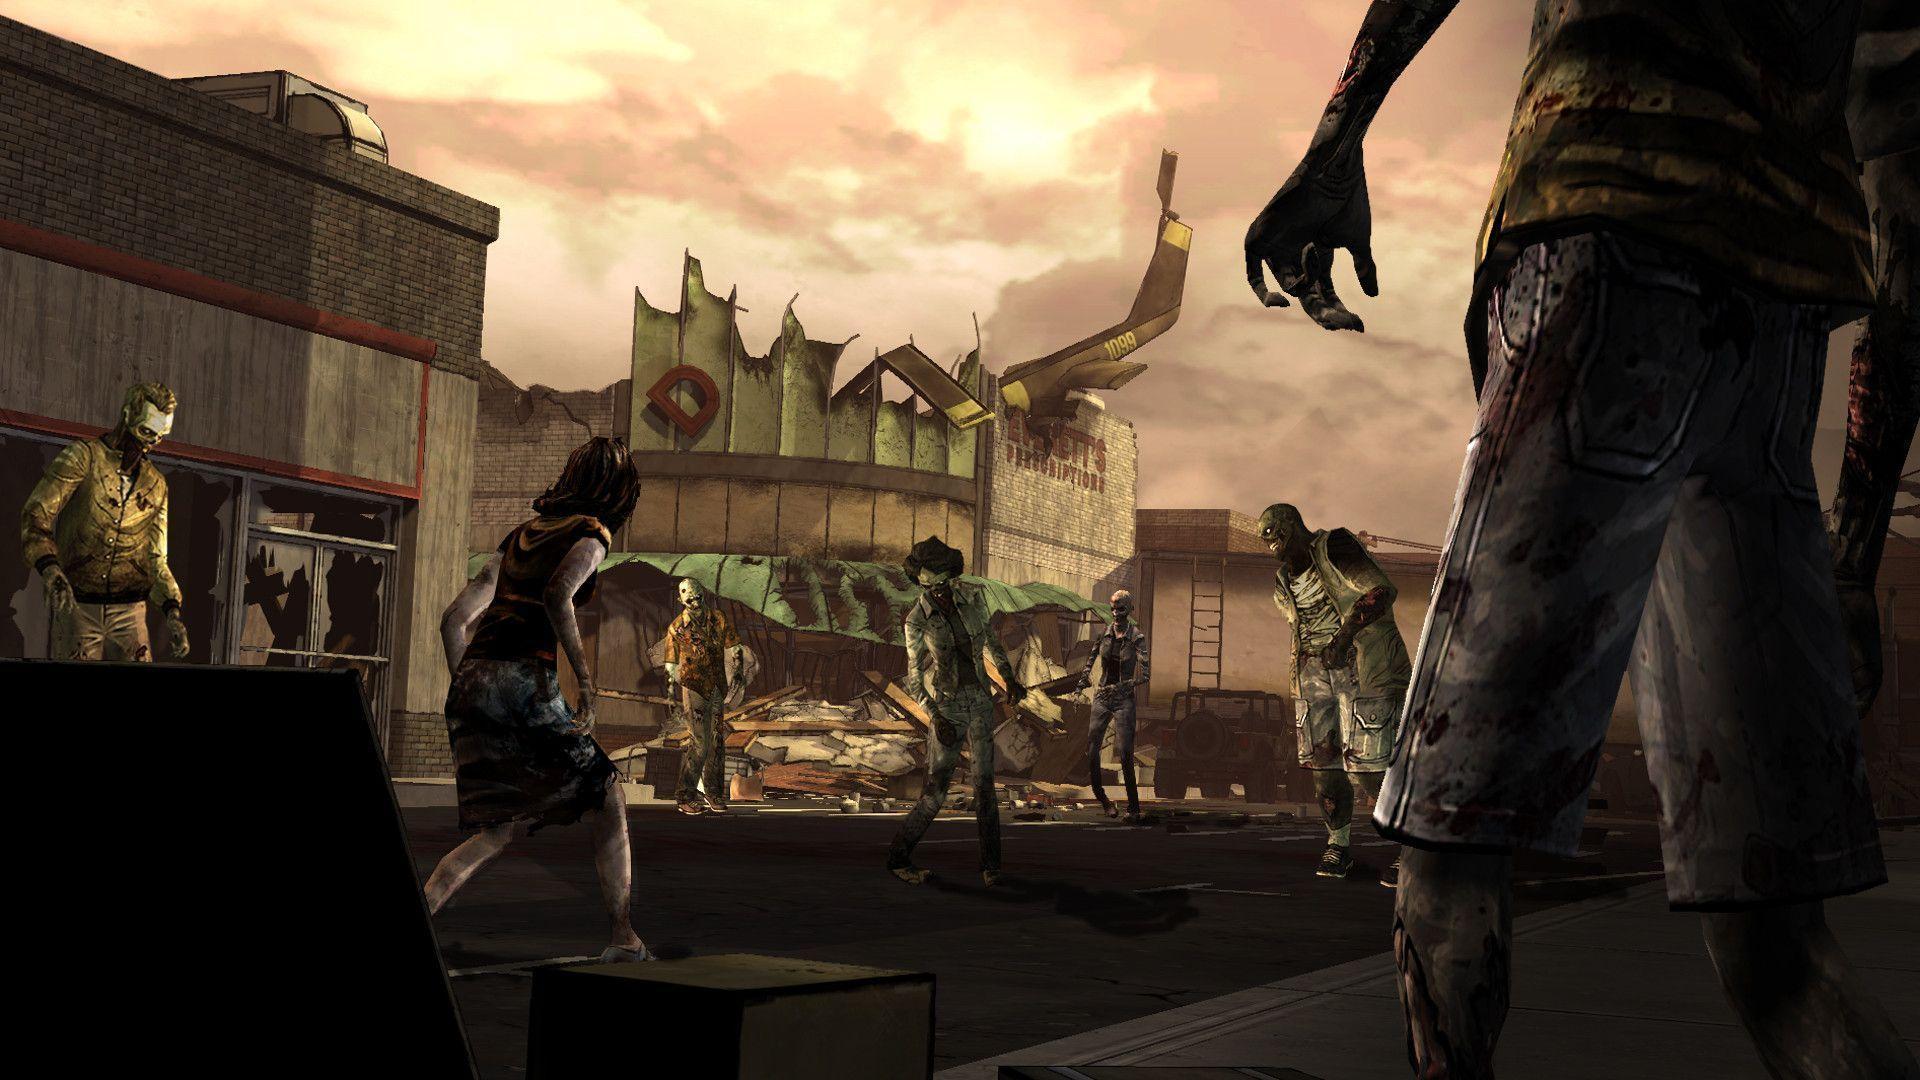 image For > The Walking Dead Game Wallpaper